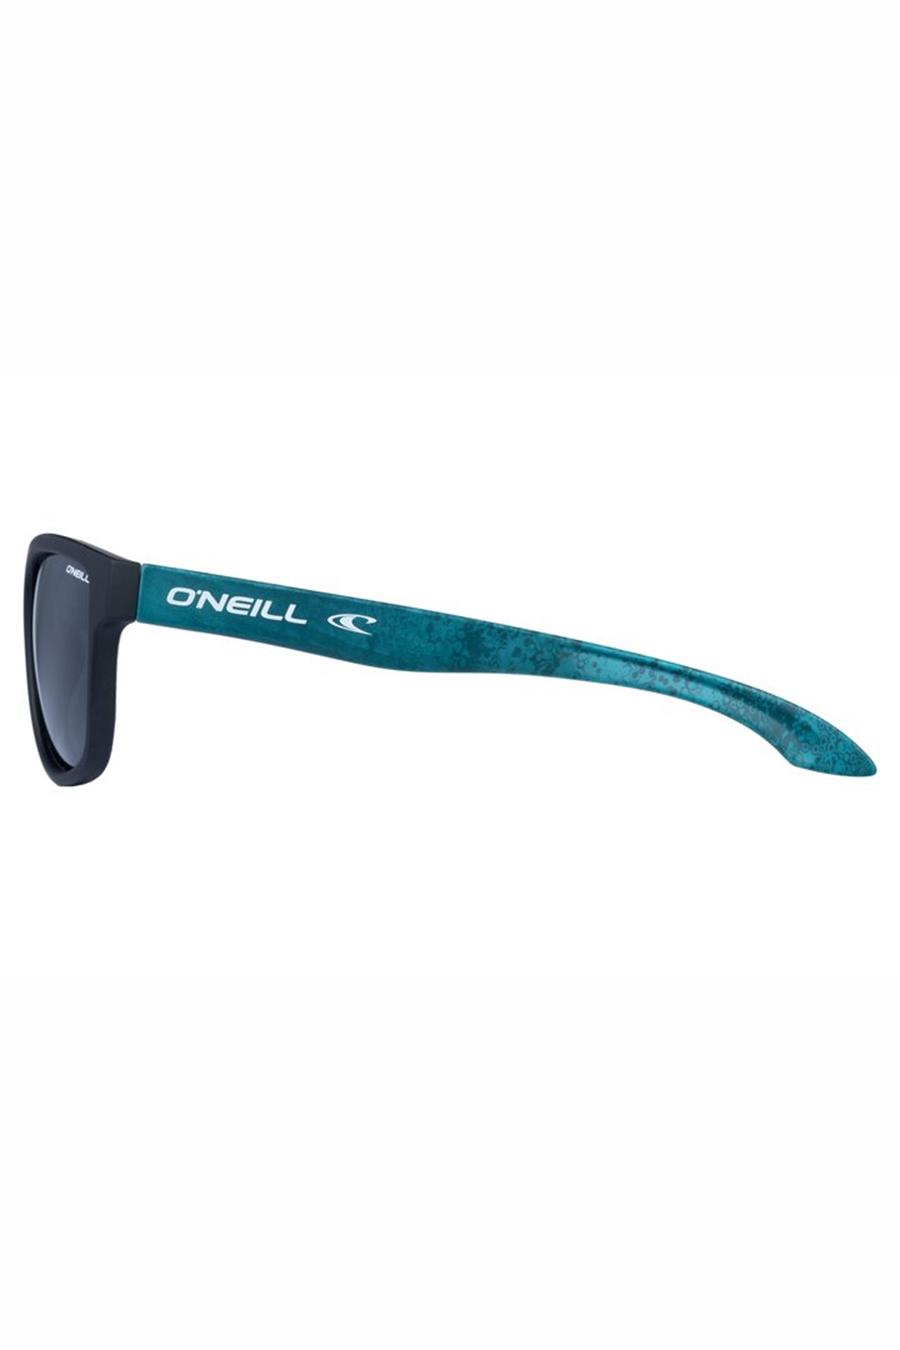 Saulesbrilles ONEILL ONS-COAST-195P